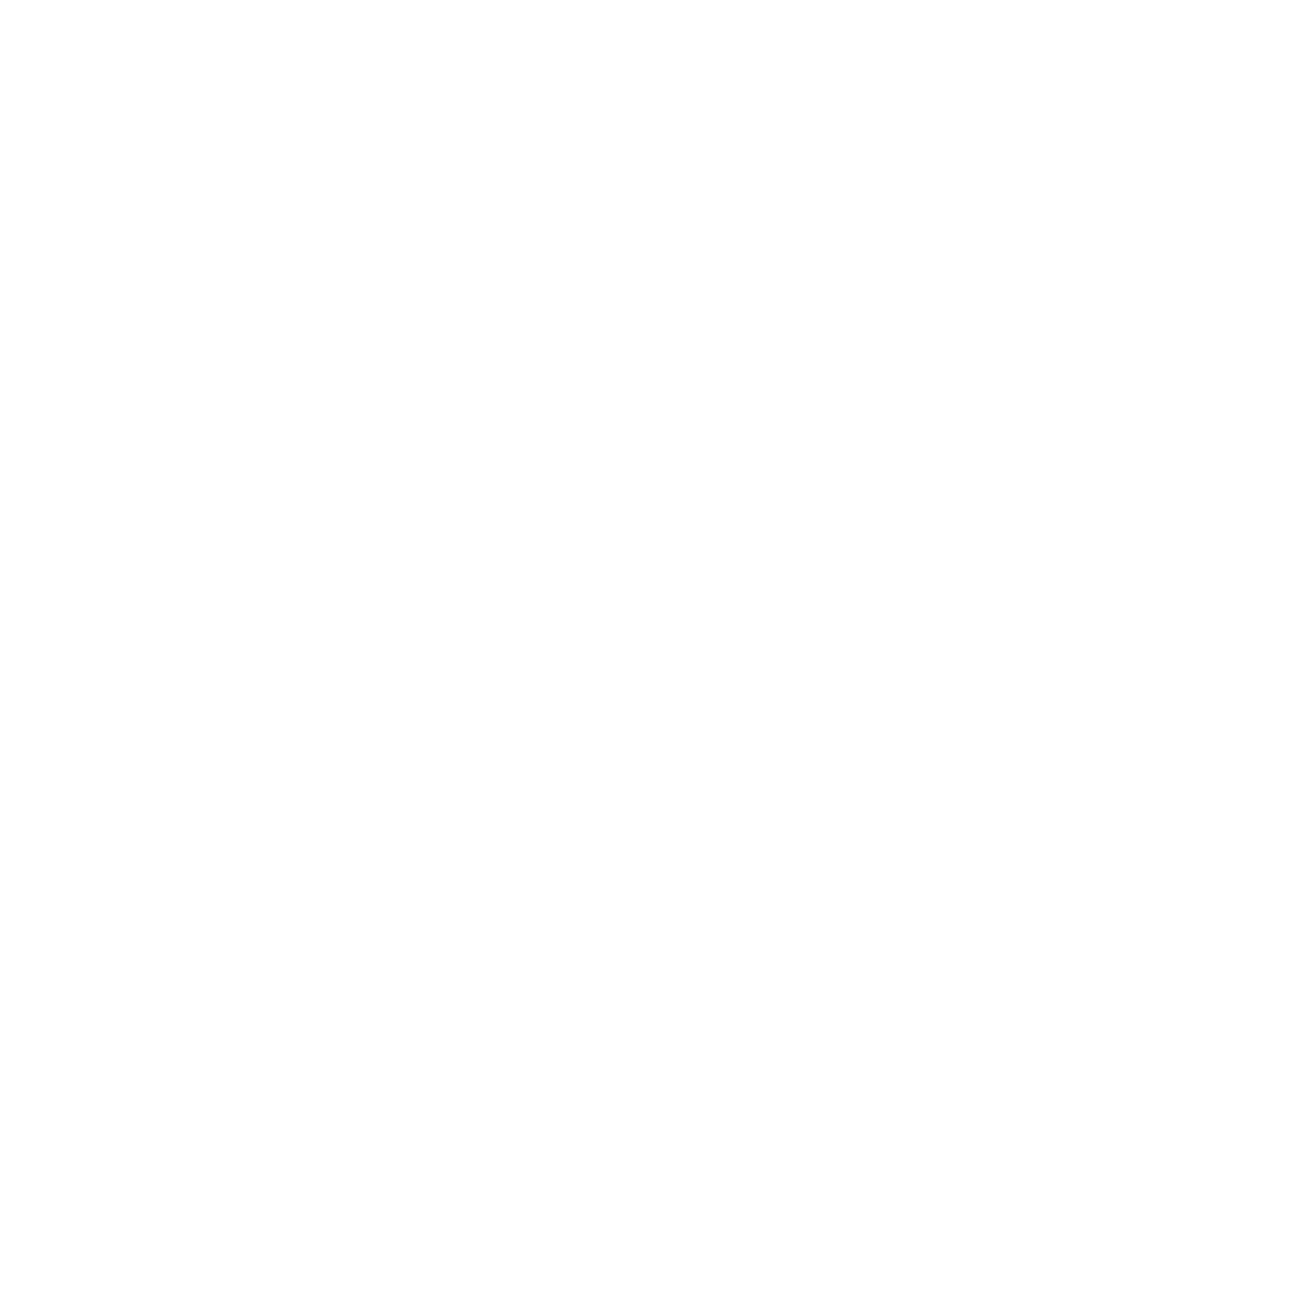 Tory Burch logo in transparent PNG and vectorized SVG formats